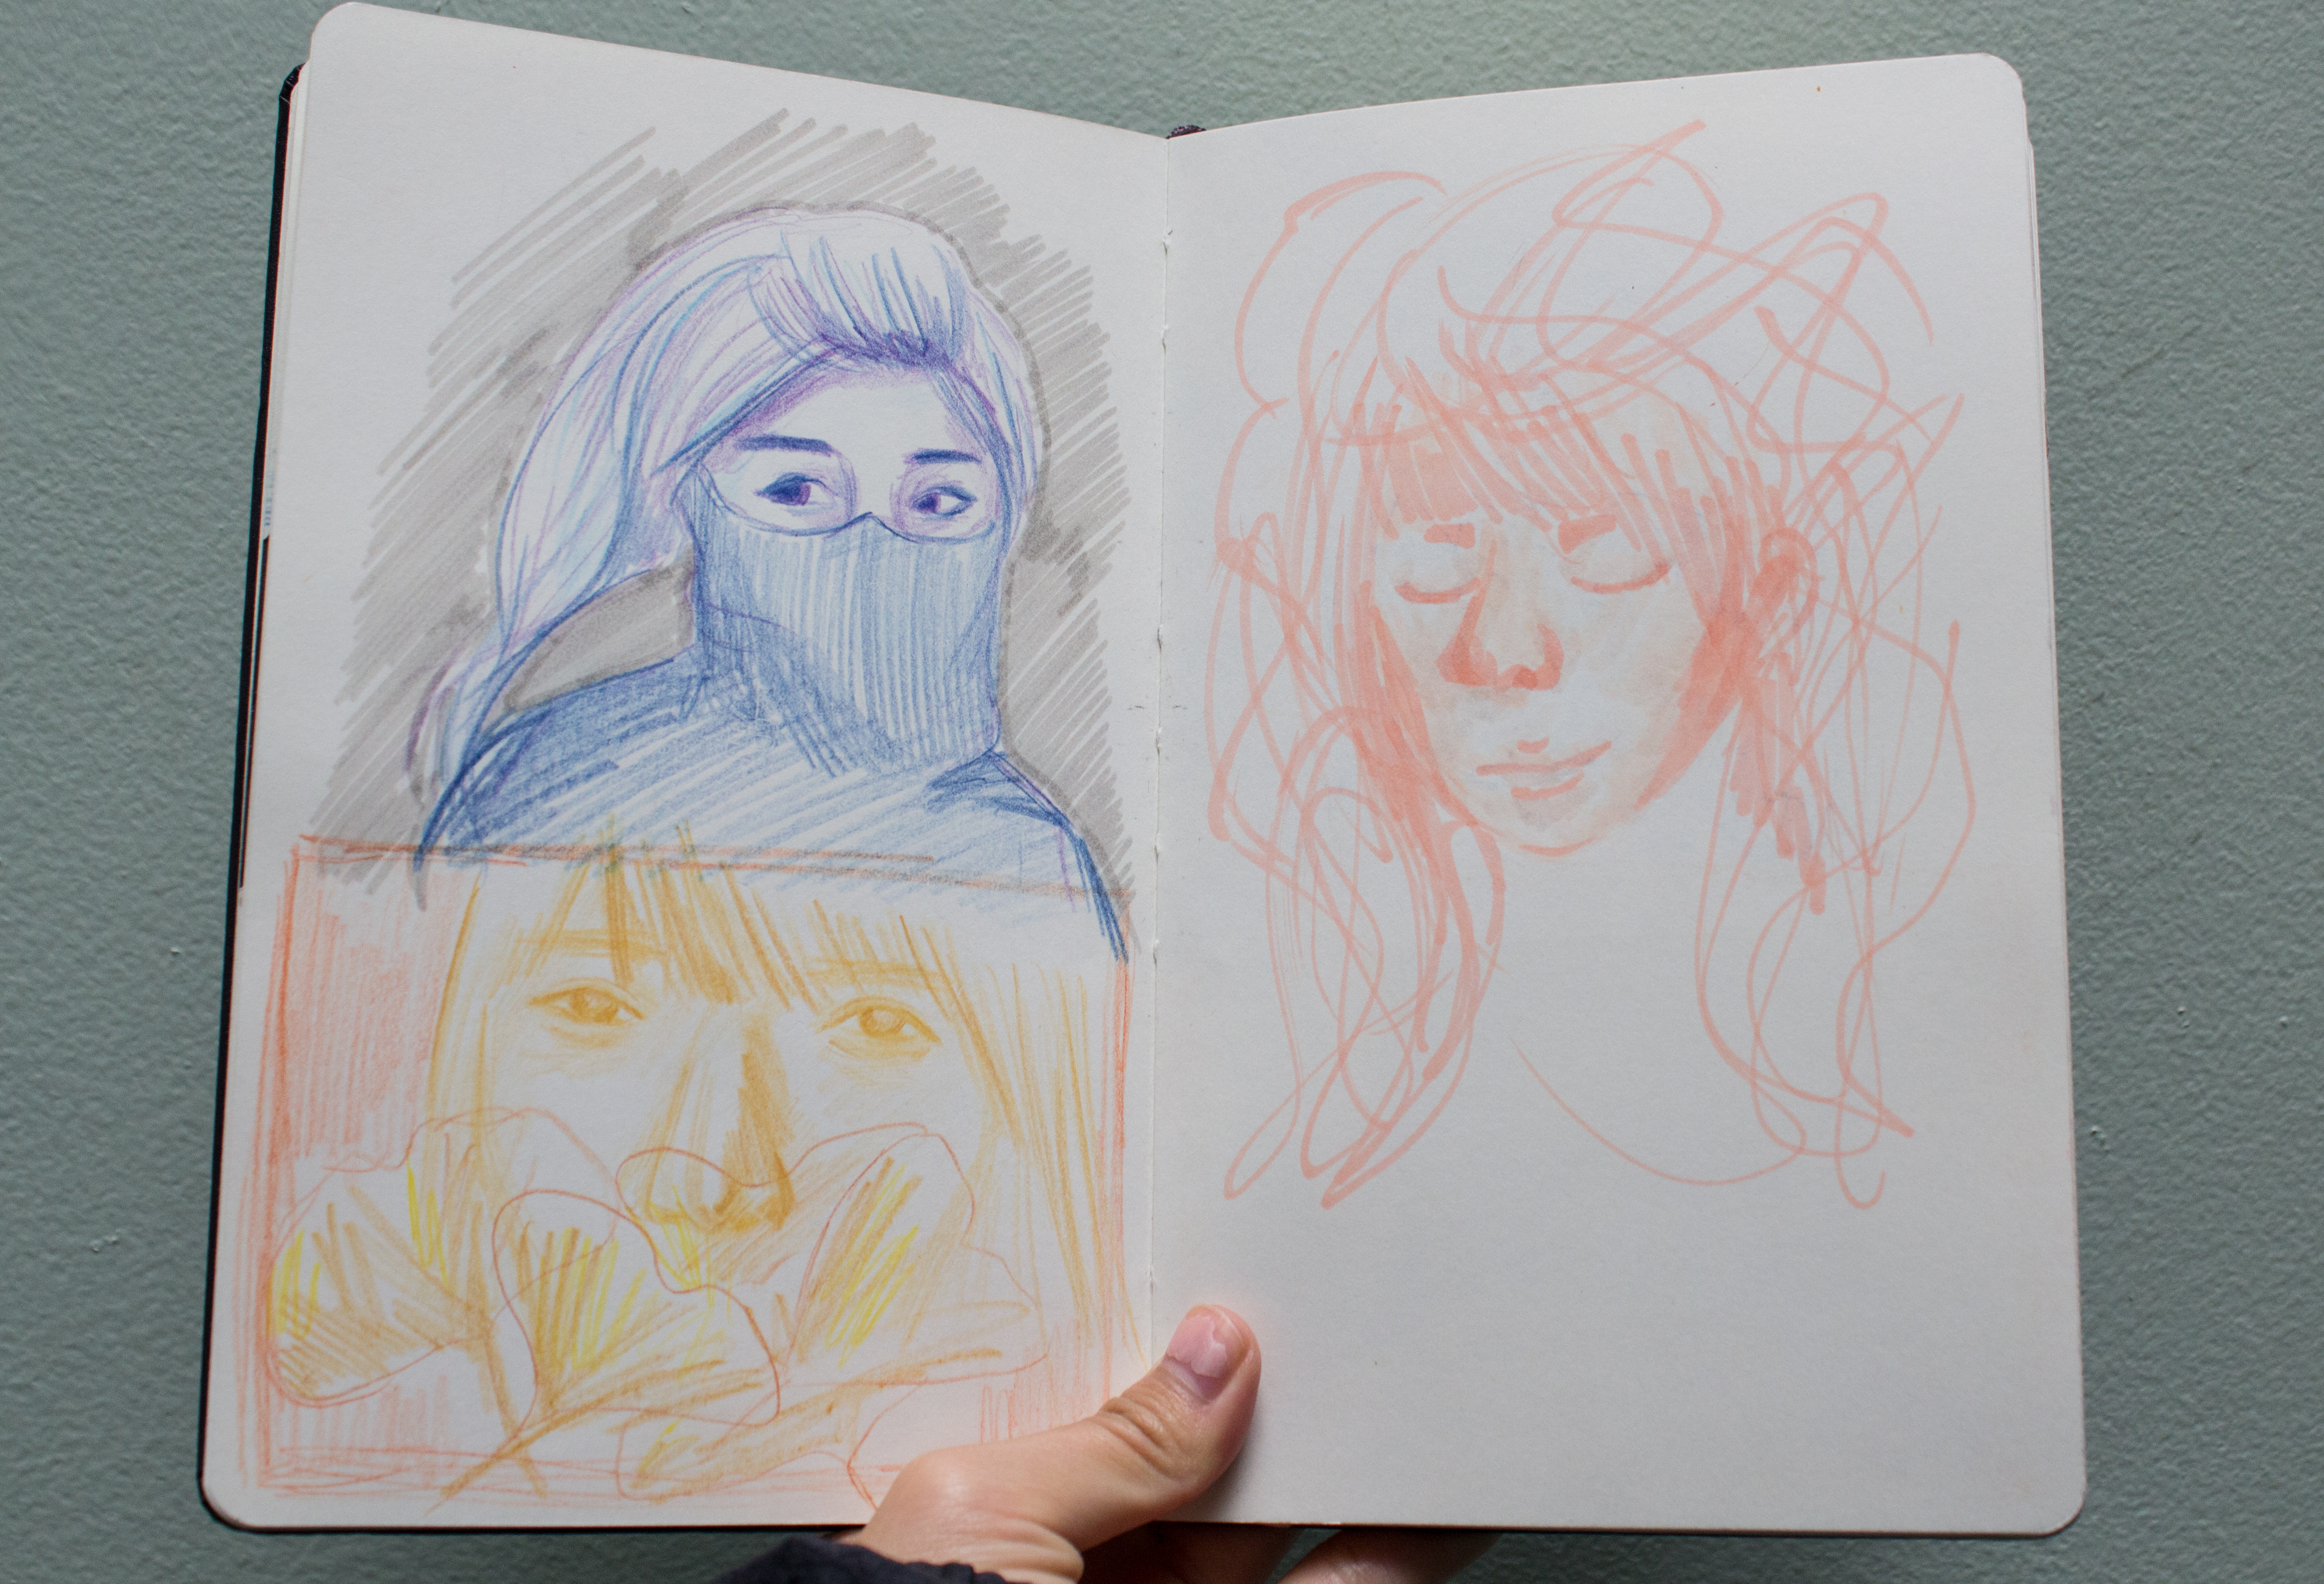 I used color pencils for the portraits on the left.